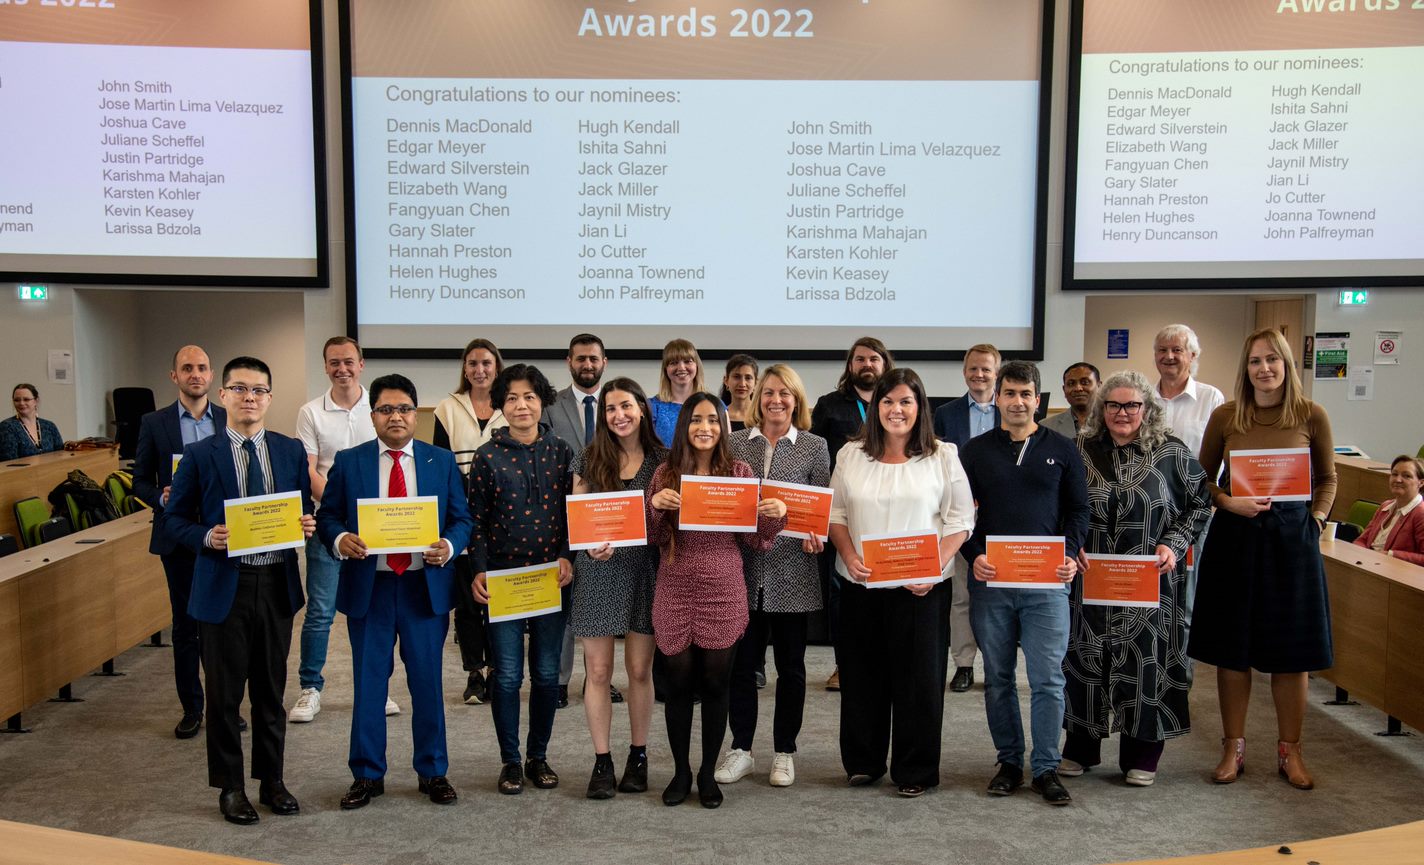 Business School Partnership Awards 2022: winners and runners up